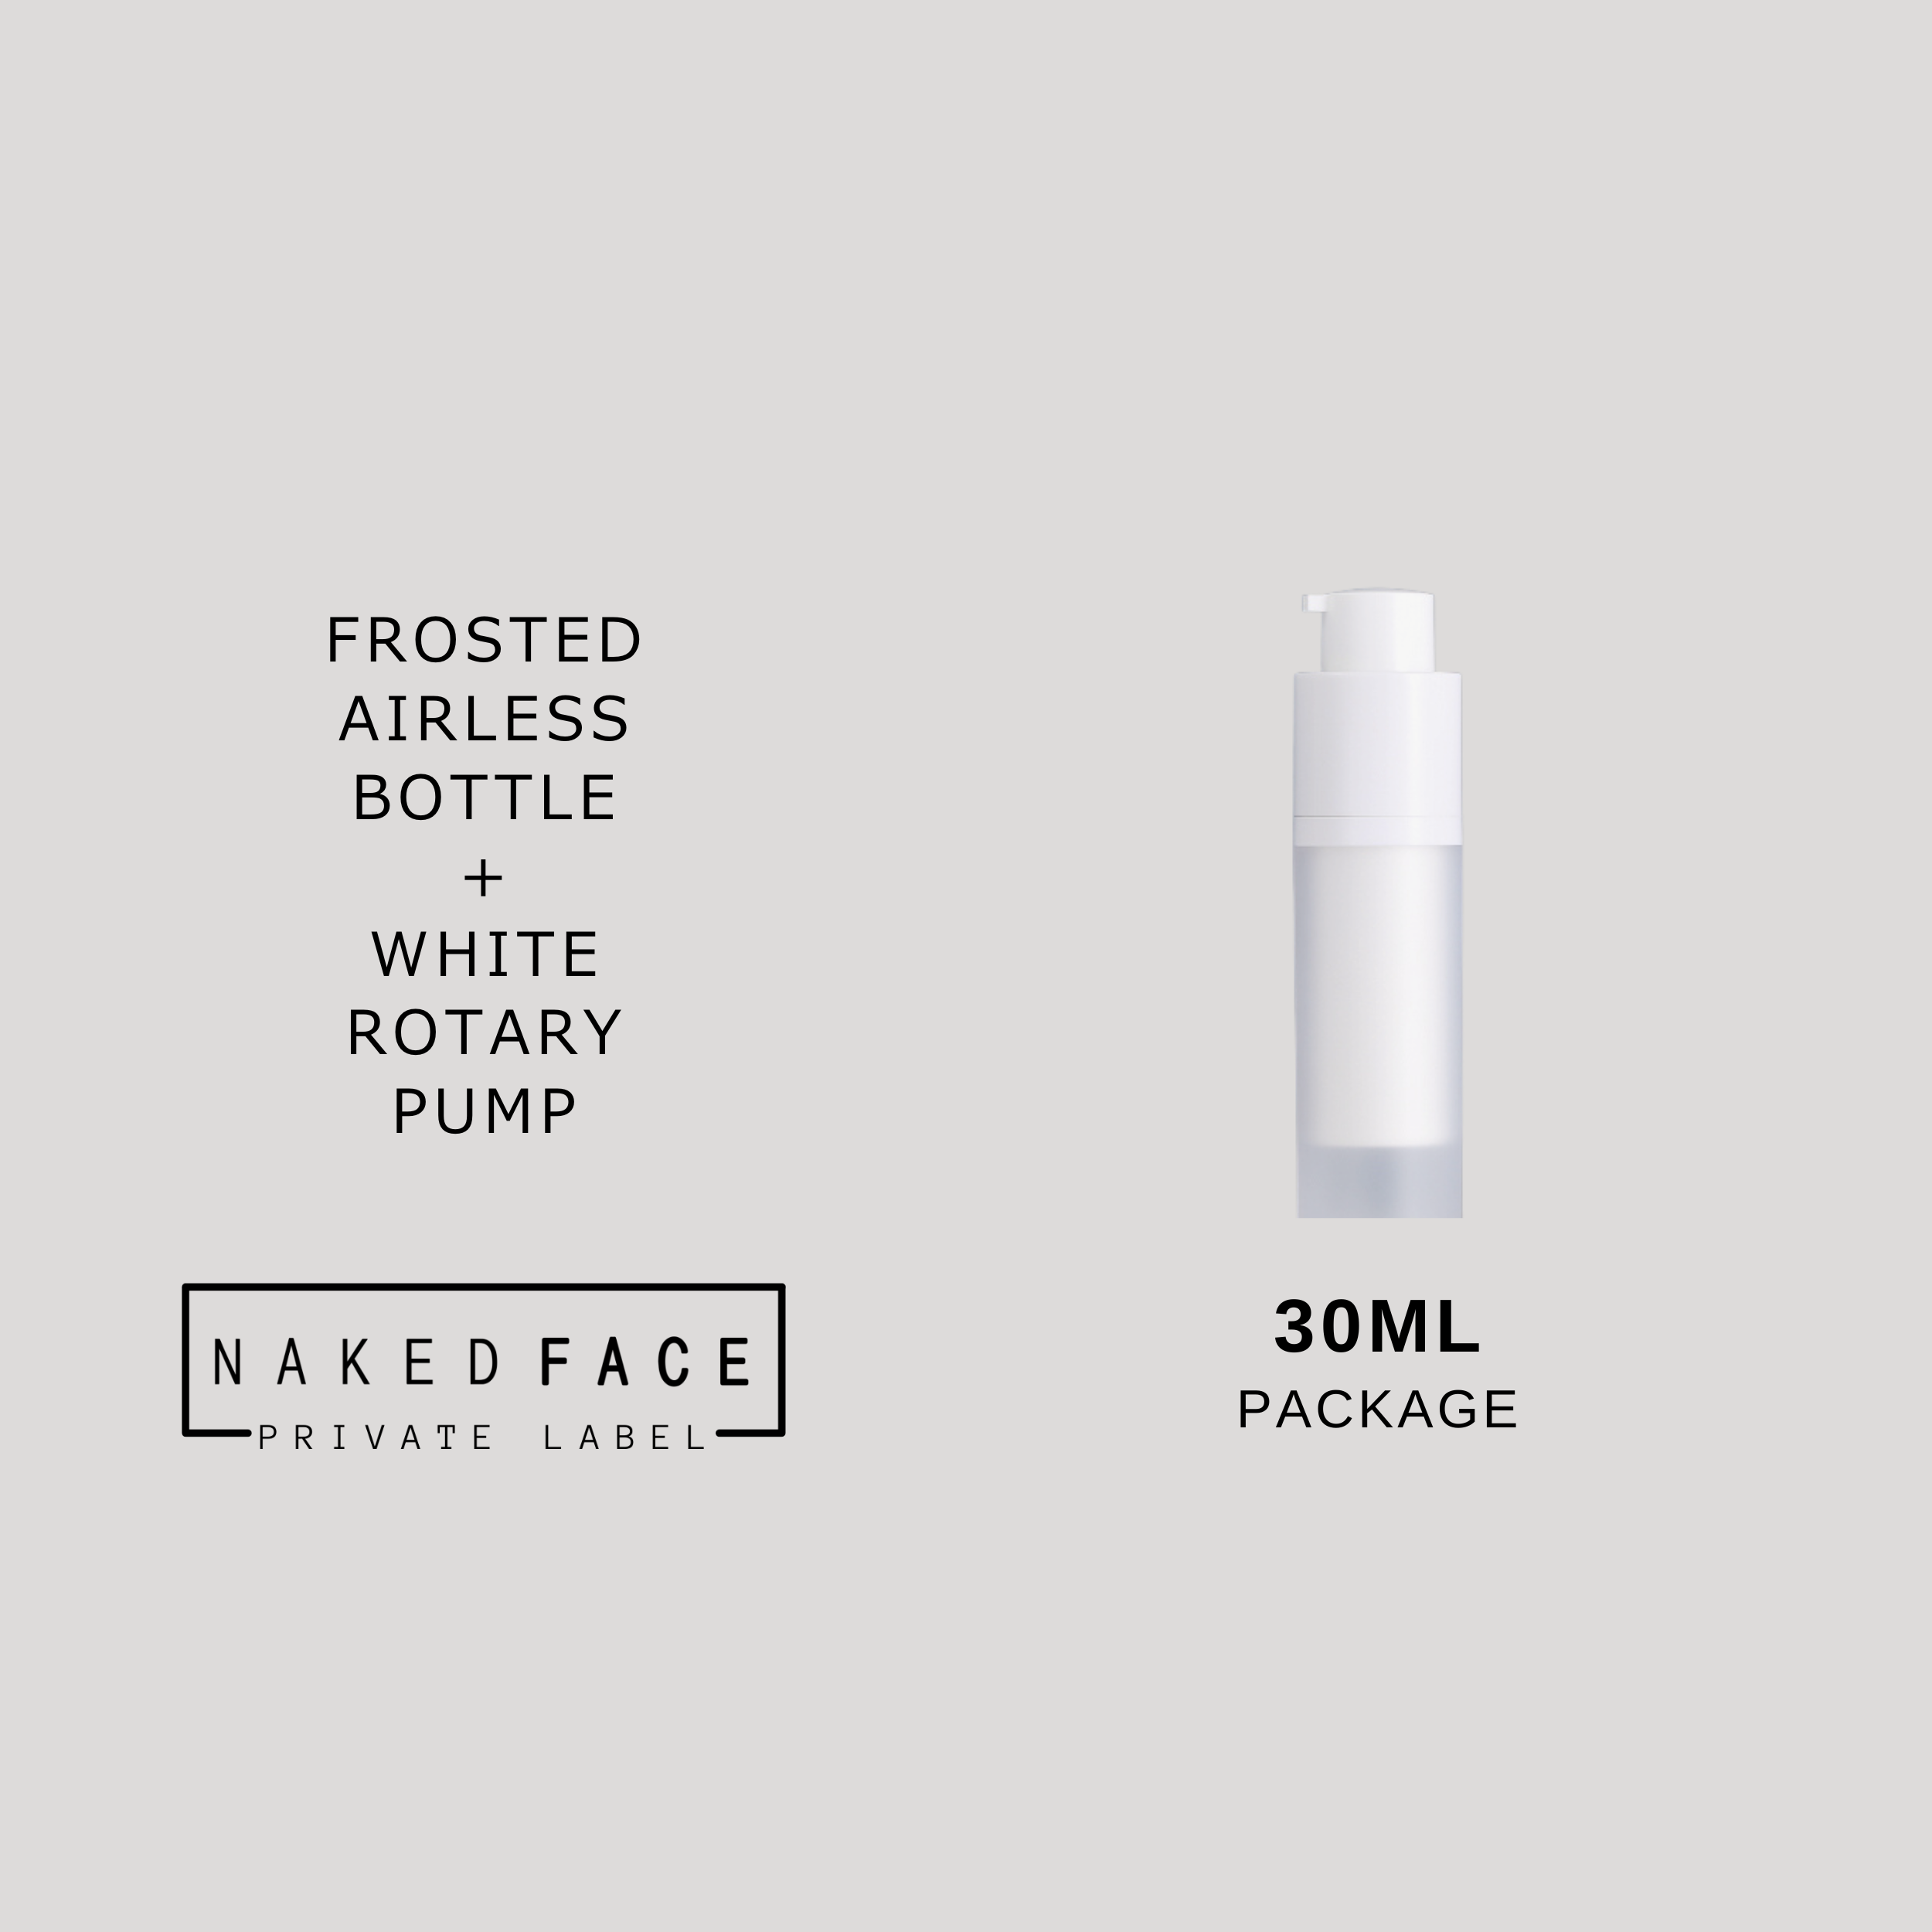 luxury 30ml airless bottle frosted with white rotary pump skincare package by nakedface private label